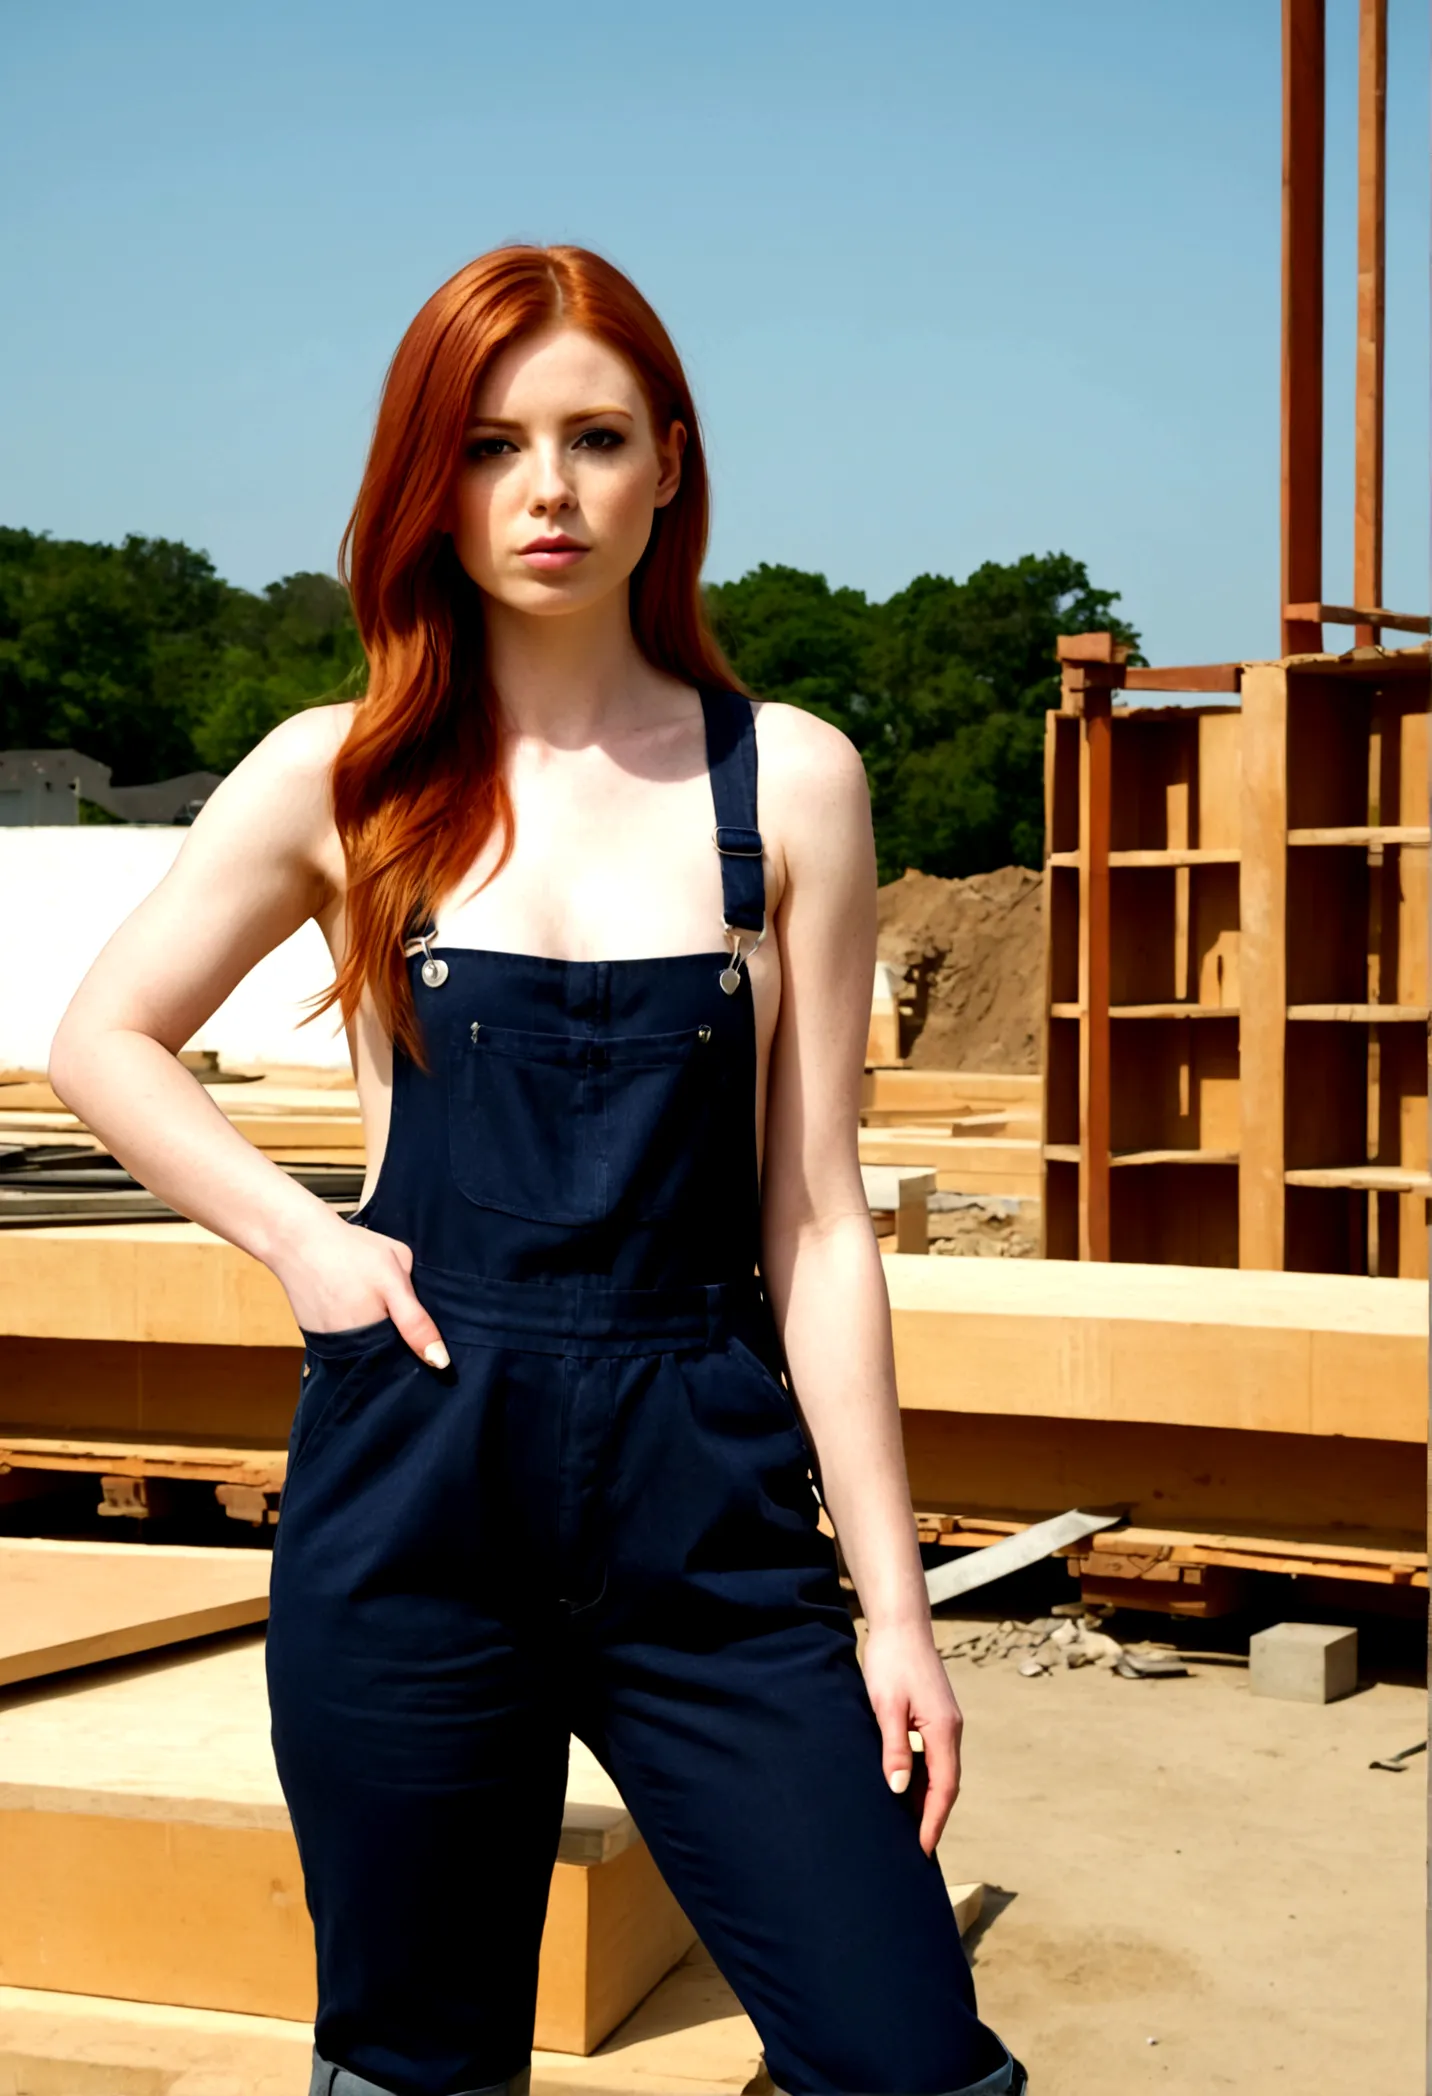 25 year old woman, redhead, sexy fit body, straight hair, tied up by construction work, swollen hand, overalls